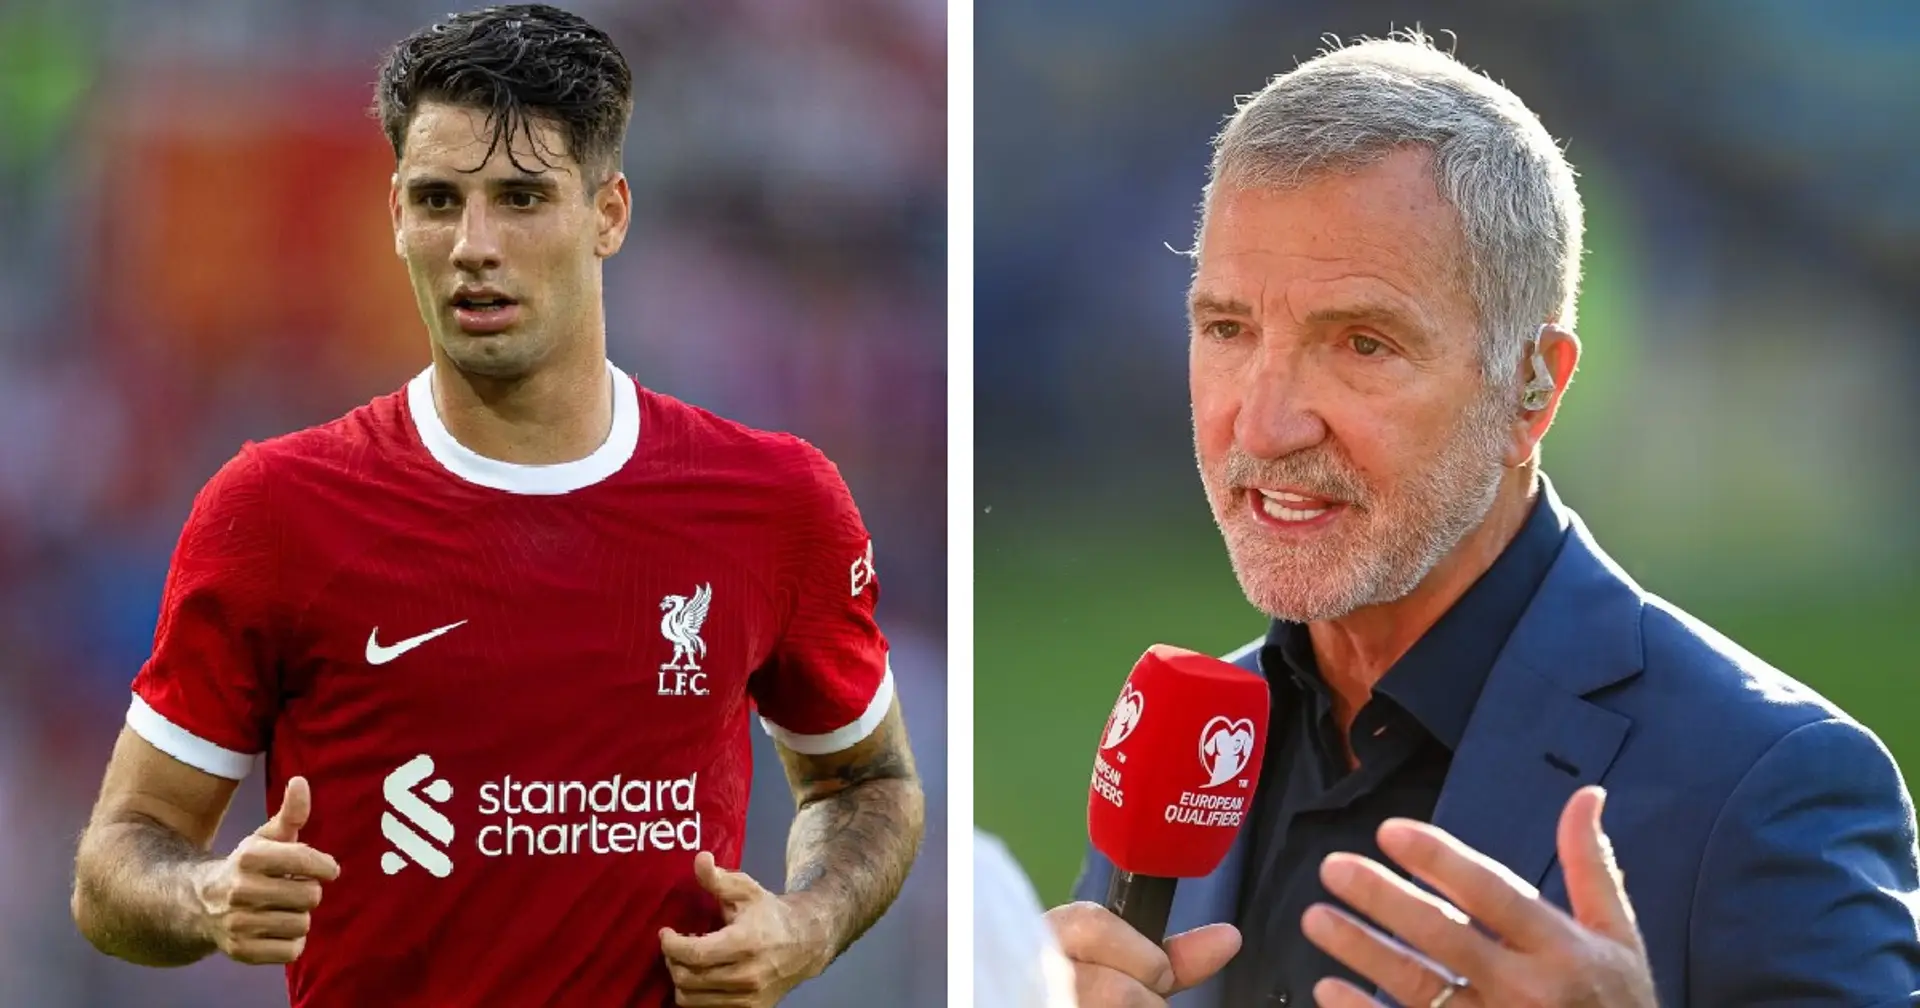 'I know next to nothing about Szoboszlai': Souness says Liverpool need more midfielders to be successful